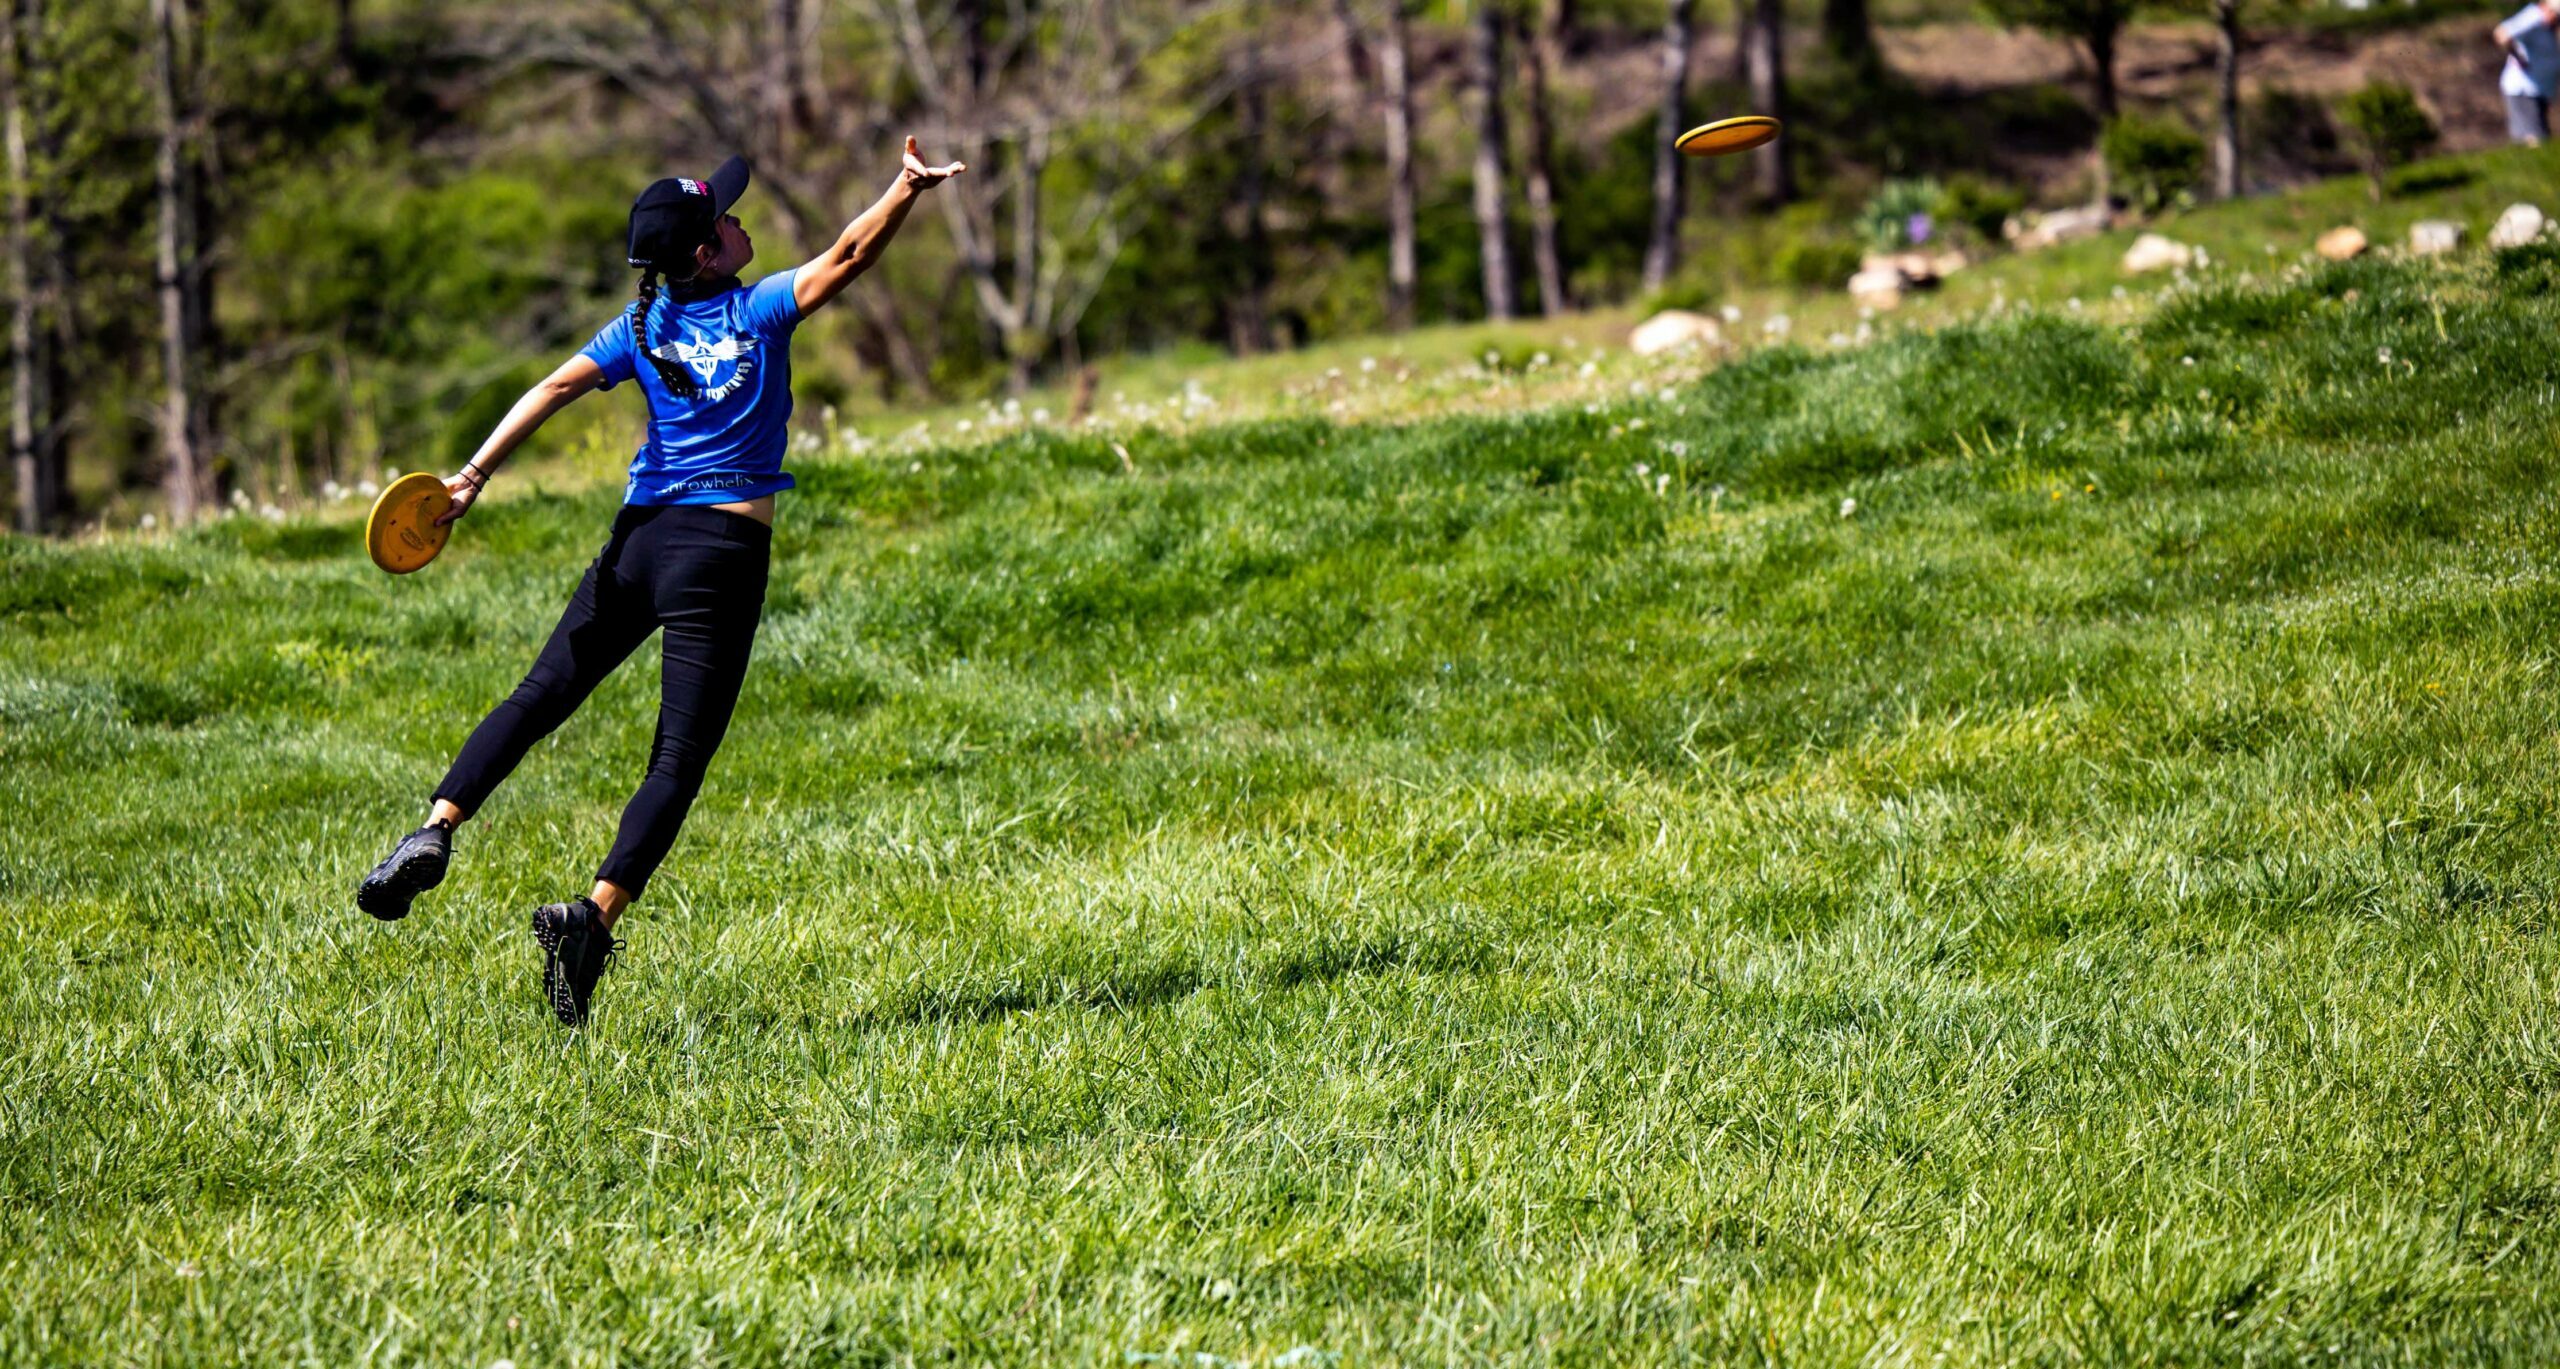 Here are the official pairings for - Disc Golf Pro Tour